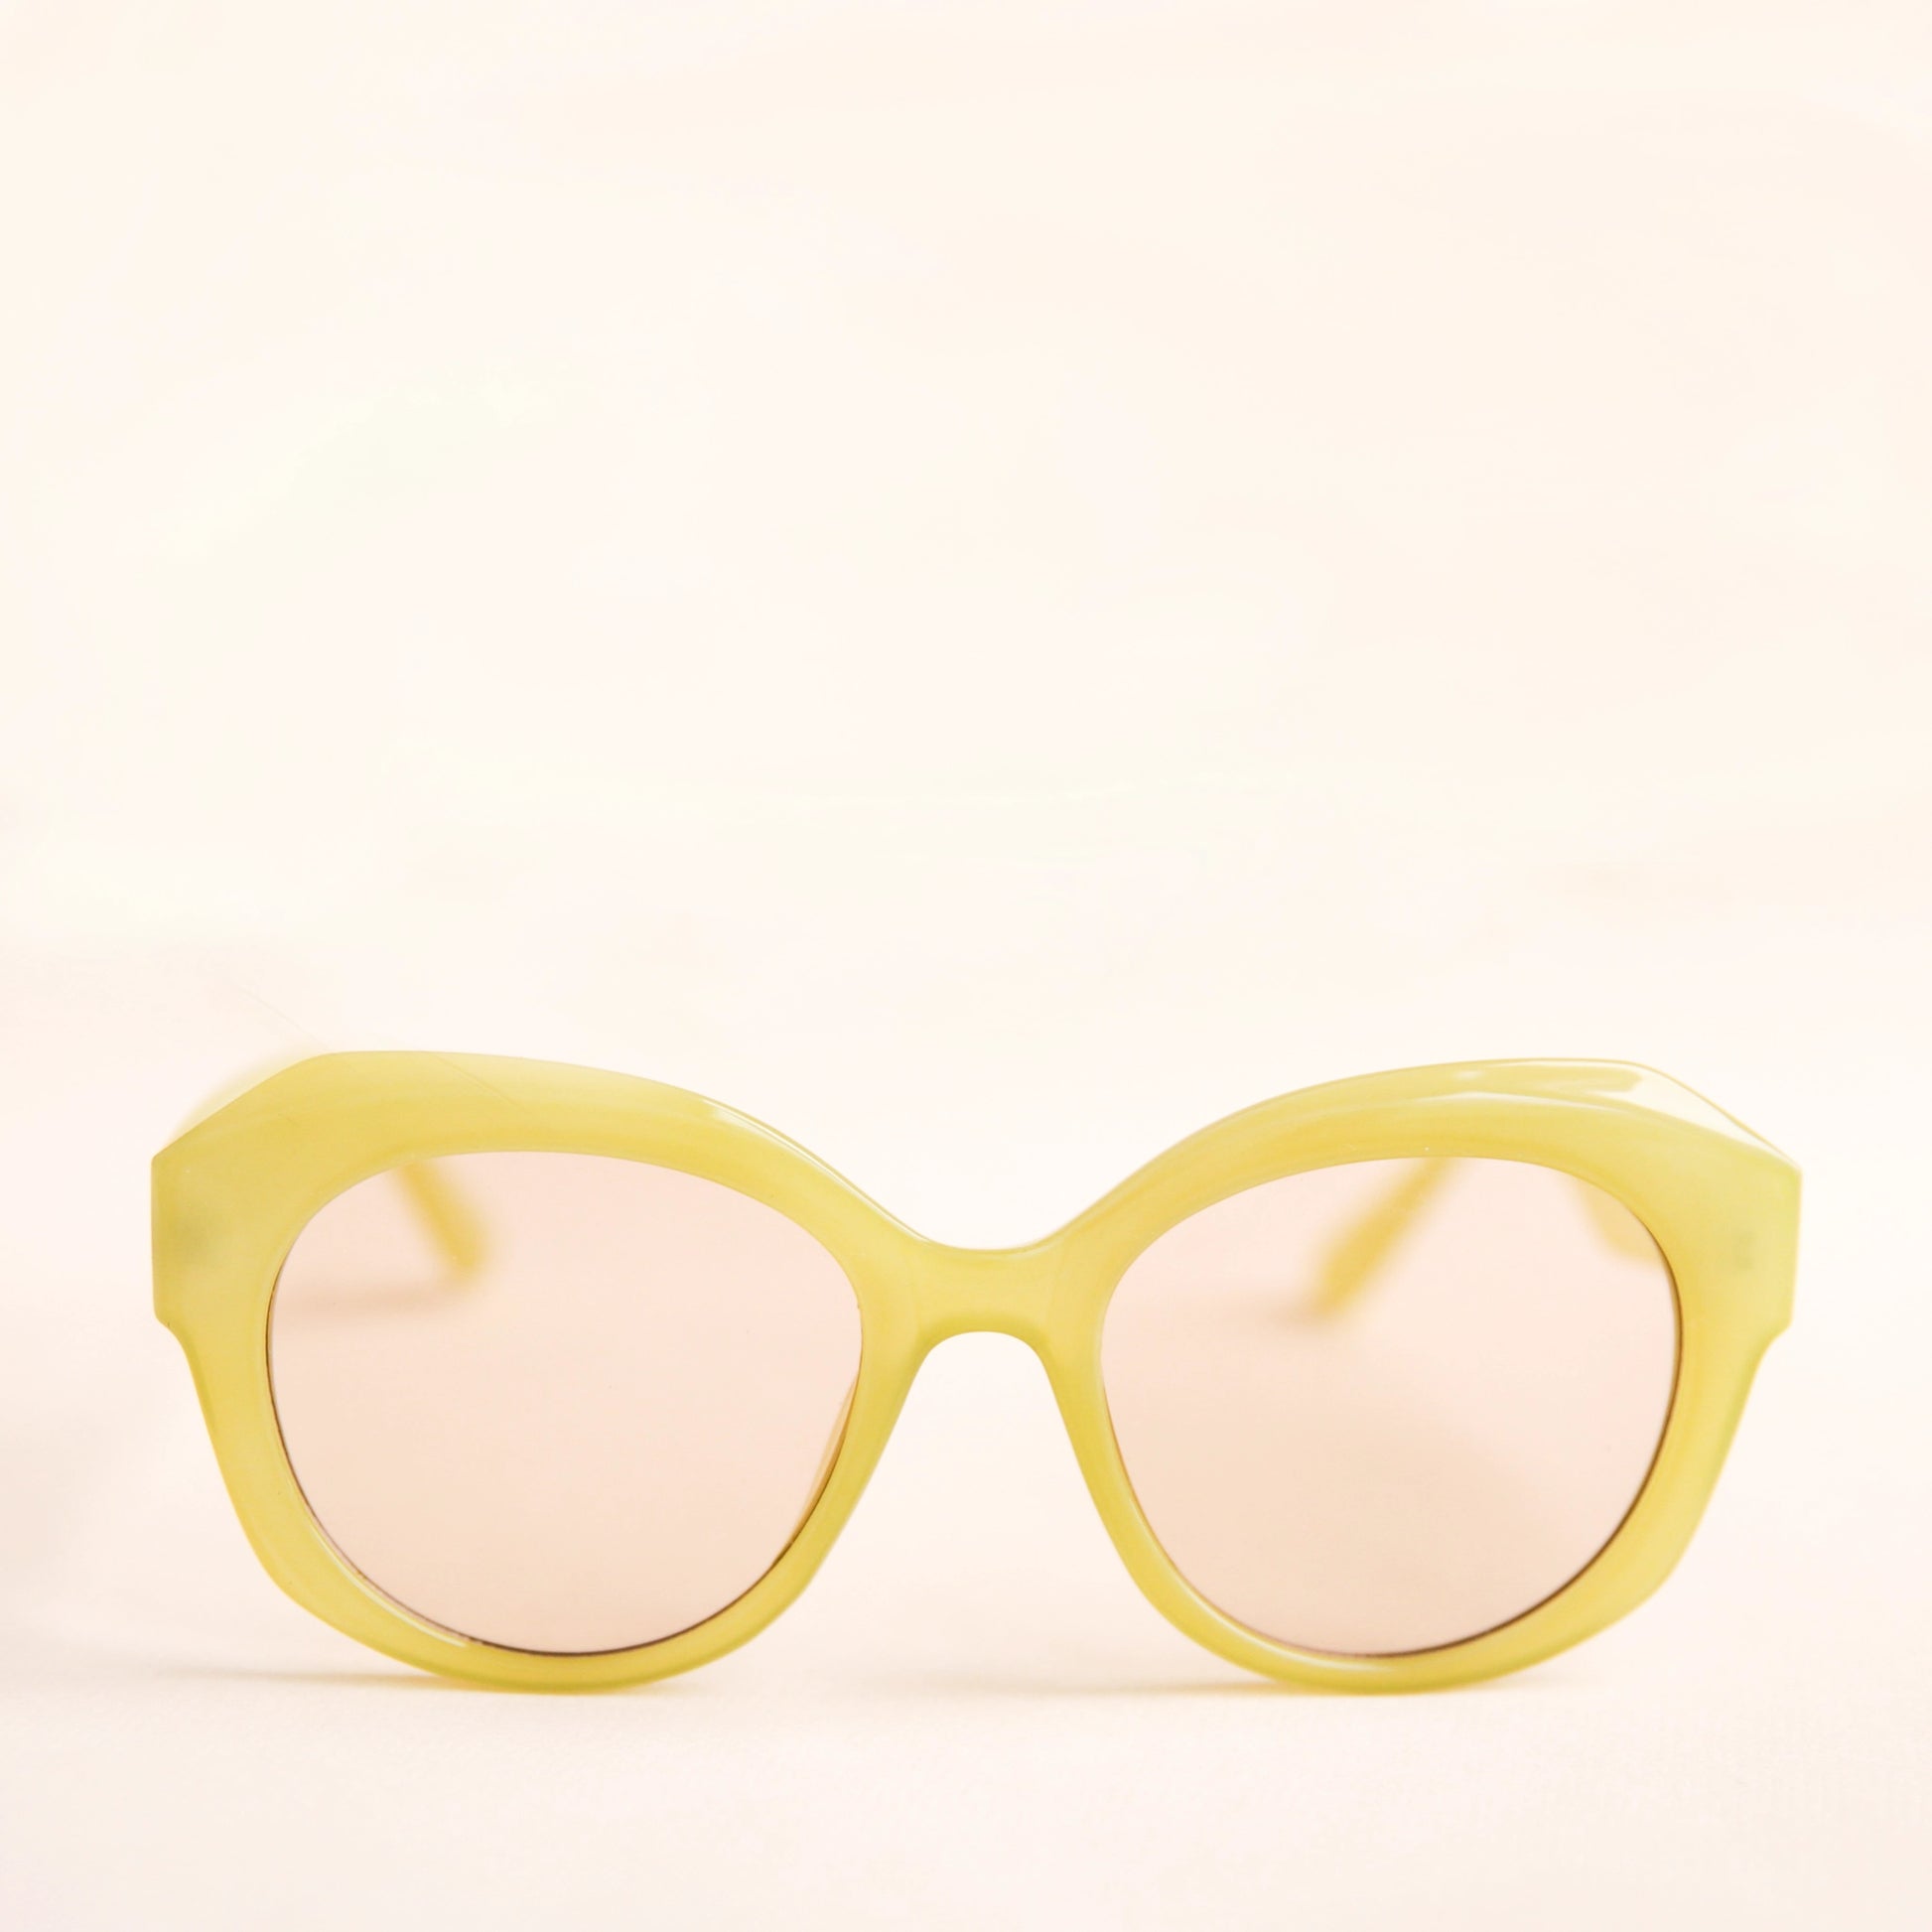 On a white background is a round pair of light green sunglasses with a light brown lens.